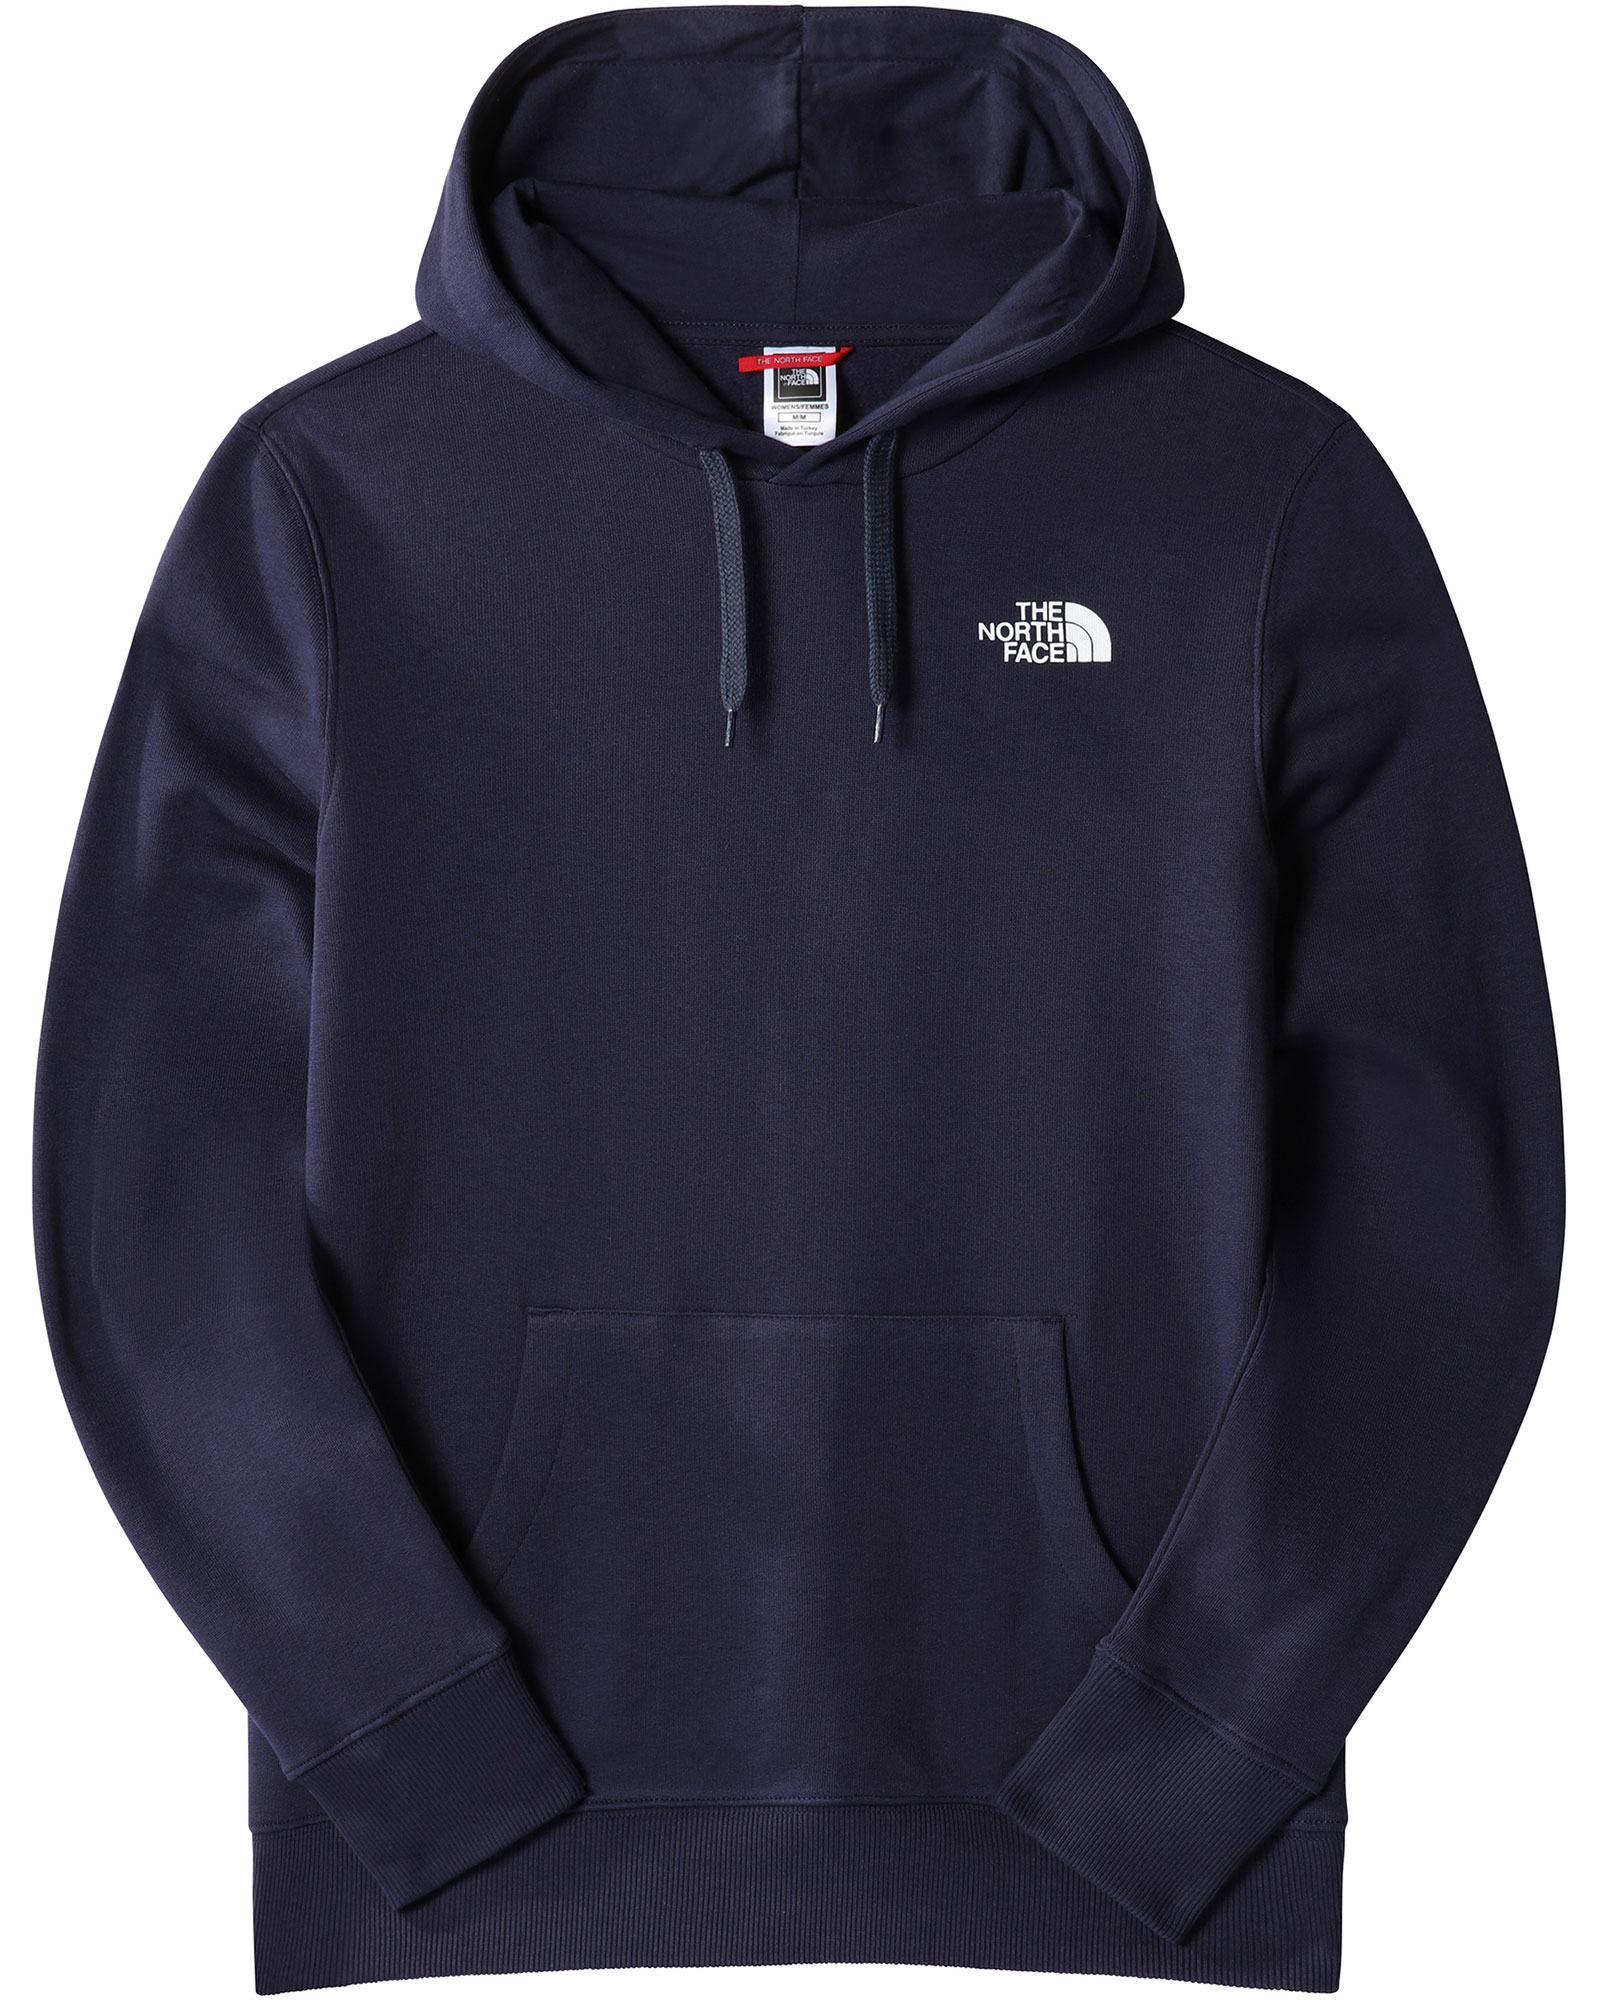 The North Face Simple Dome Women's Hoodie | Ellis Brigham